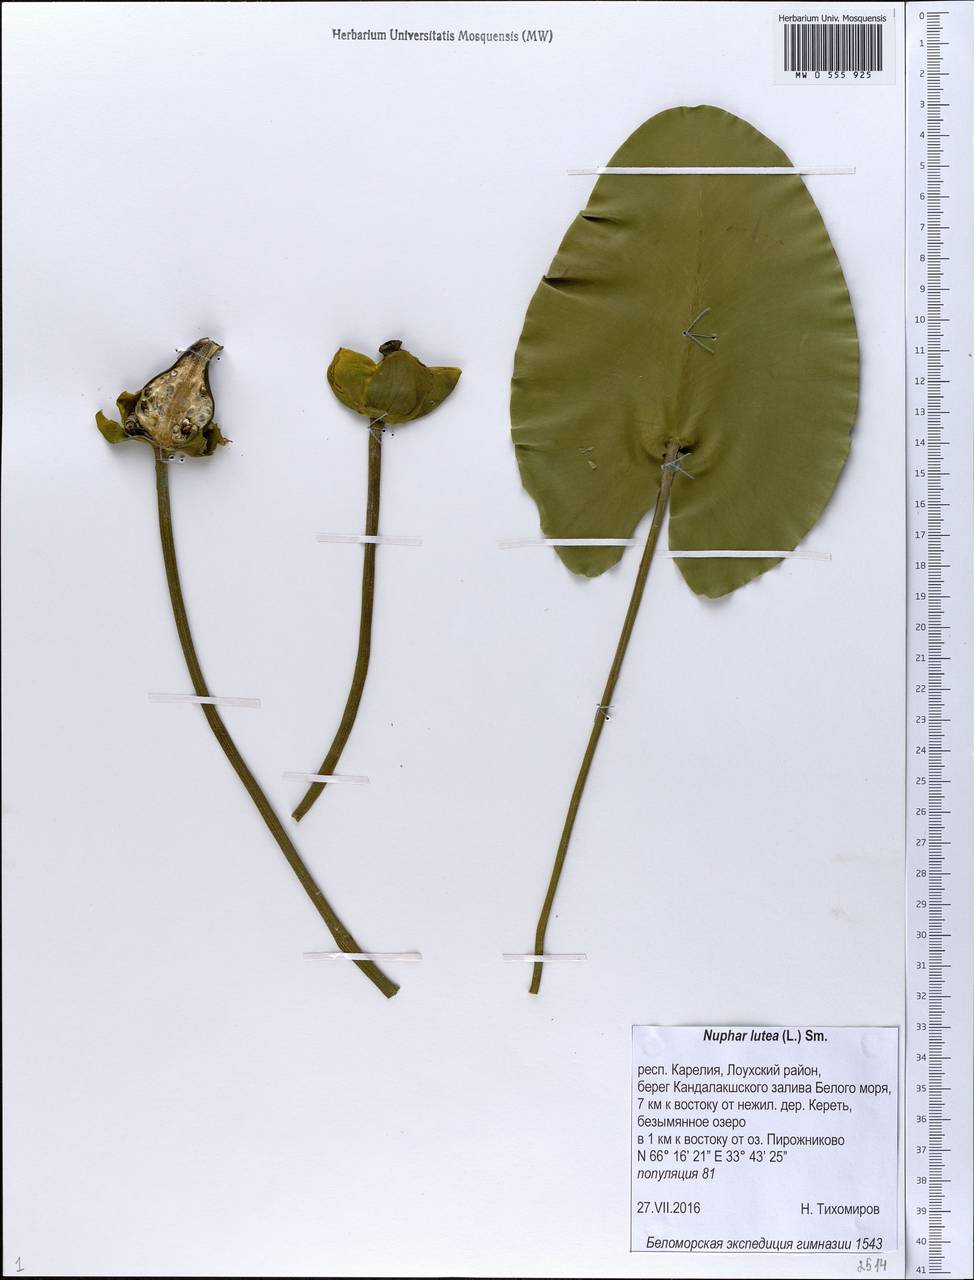 Nuphar lutea (L.) Sibth. & Sm., Eastern Europe, Northern region (E1) (Russia)